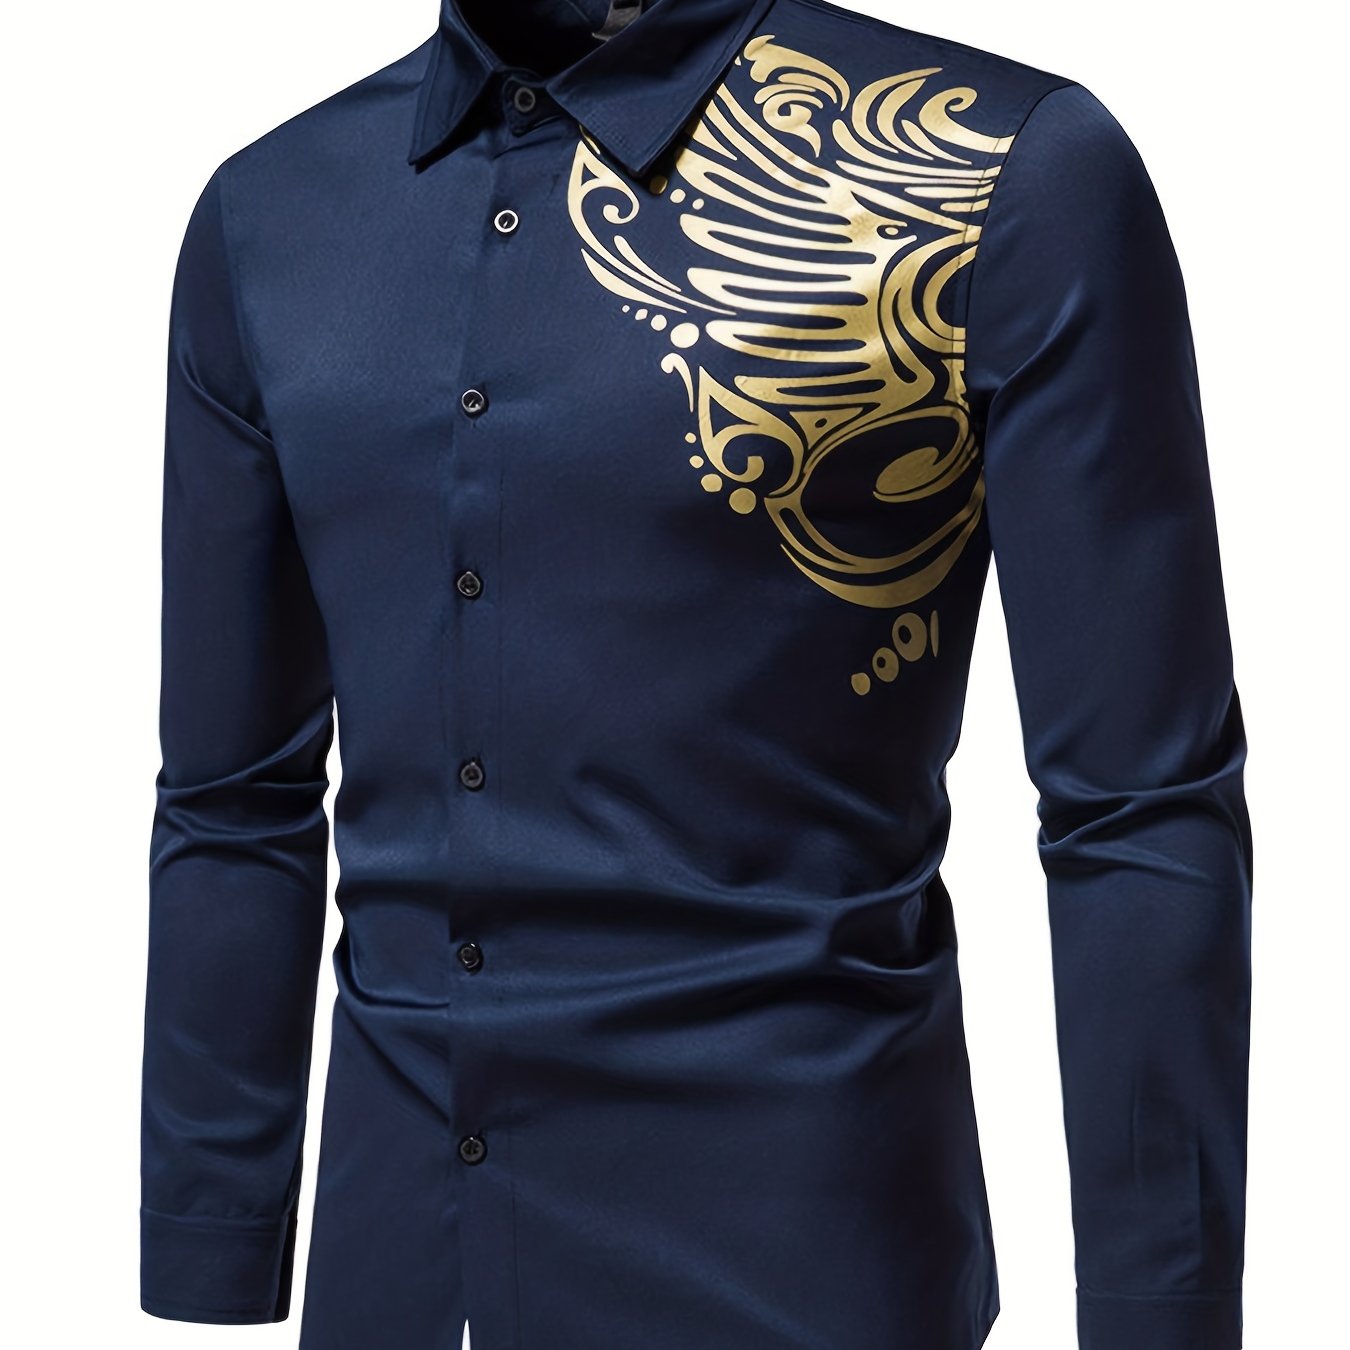 Make a Statement in This Stylish Men's Gold-Printed Long-Sleeved Shirt